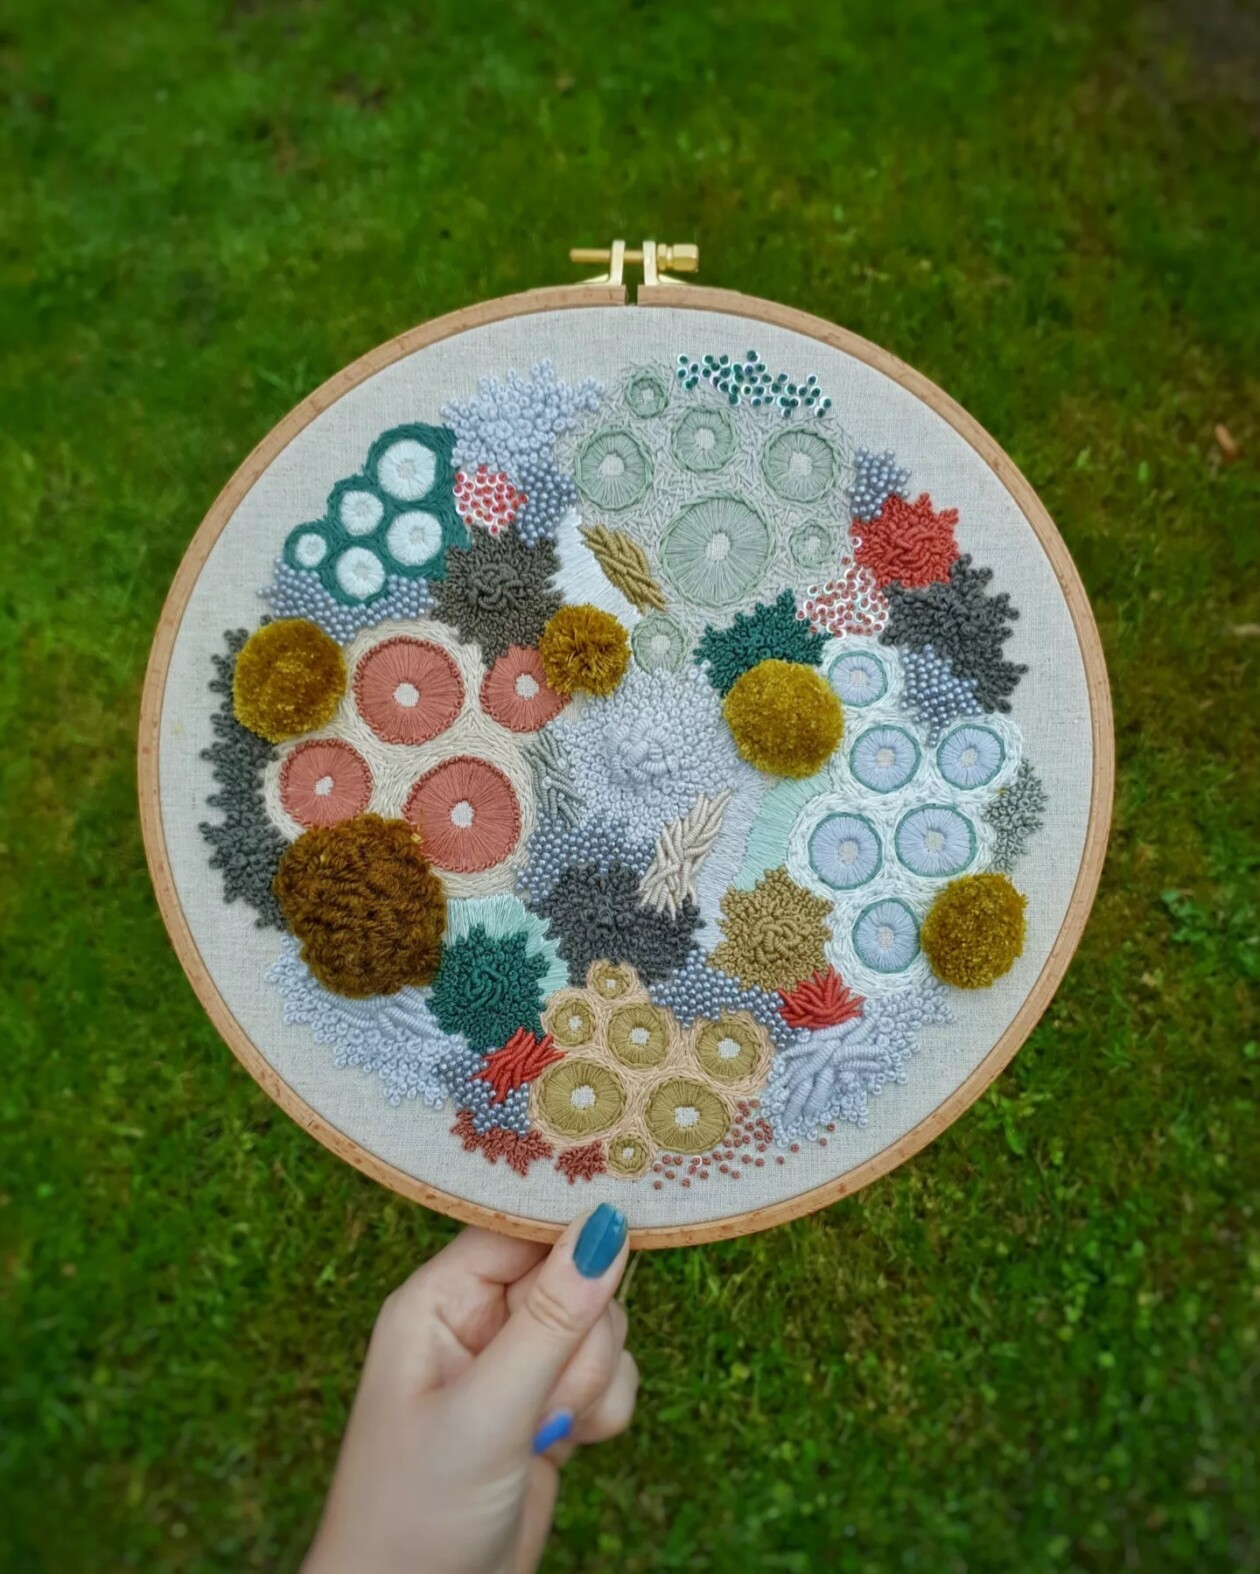 Marvelous Embroideries Inspired By Moss, Coral, And Lichen Forms By Hannah Kwasnycia (14)